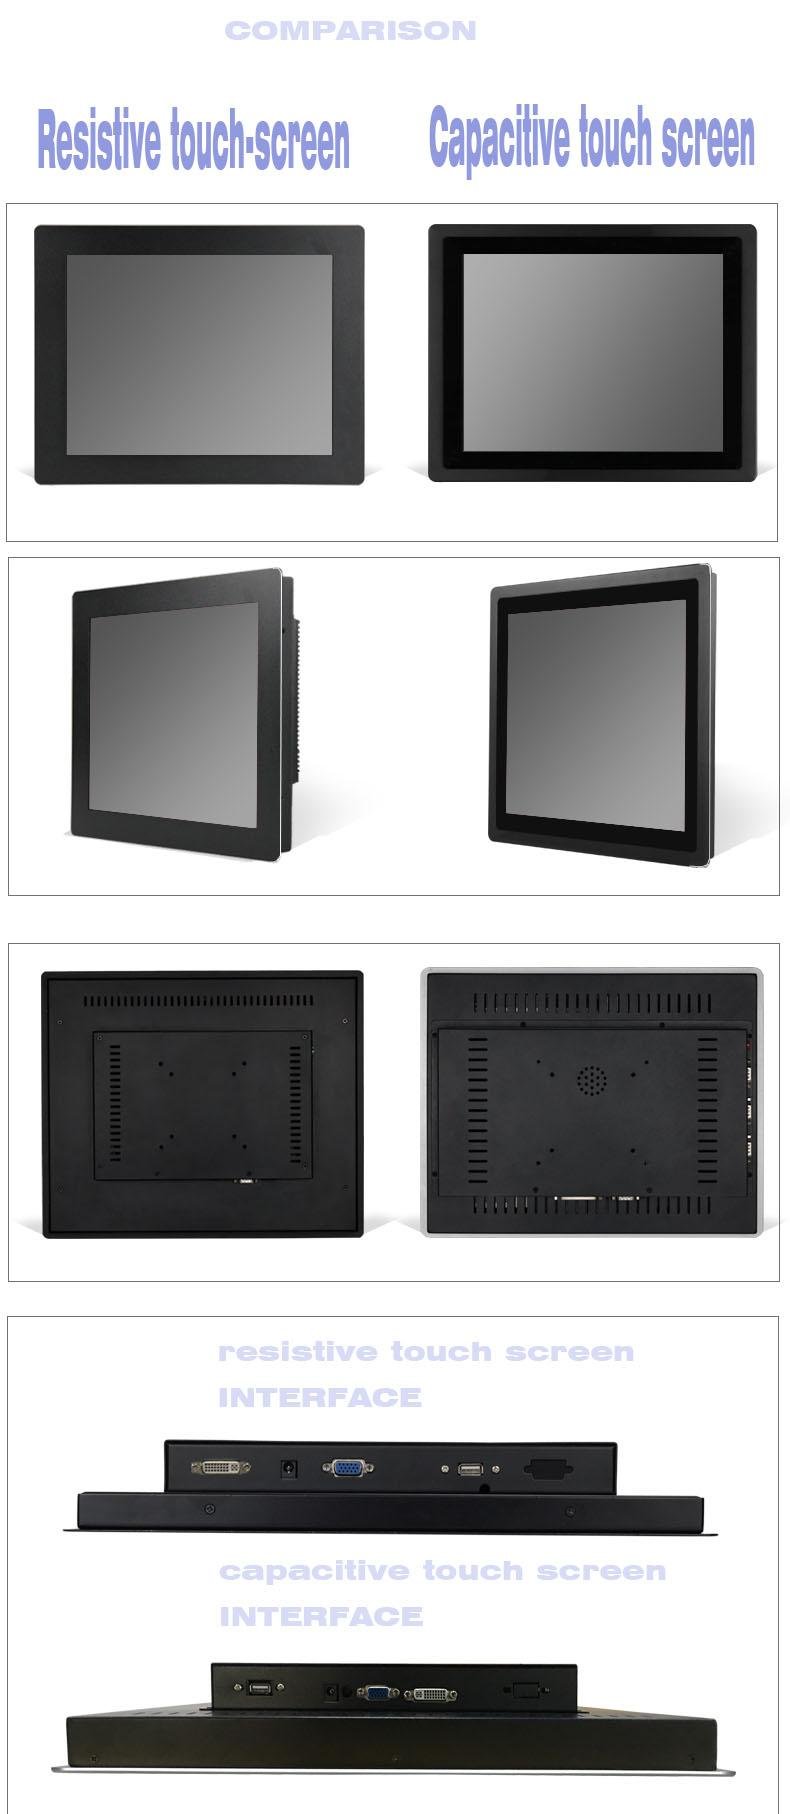 IP65 Industrial Touch Monitor - Capacitive touch 19.0 inch 2